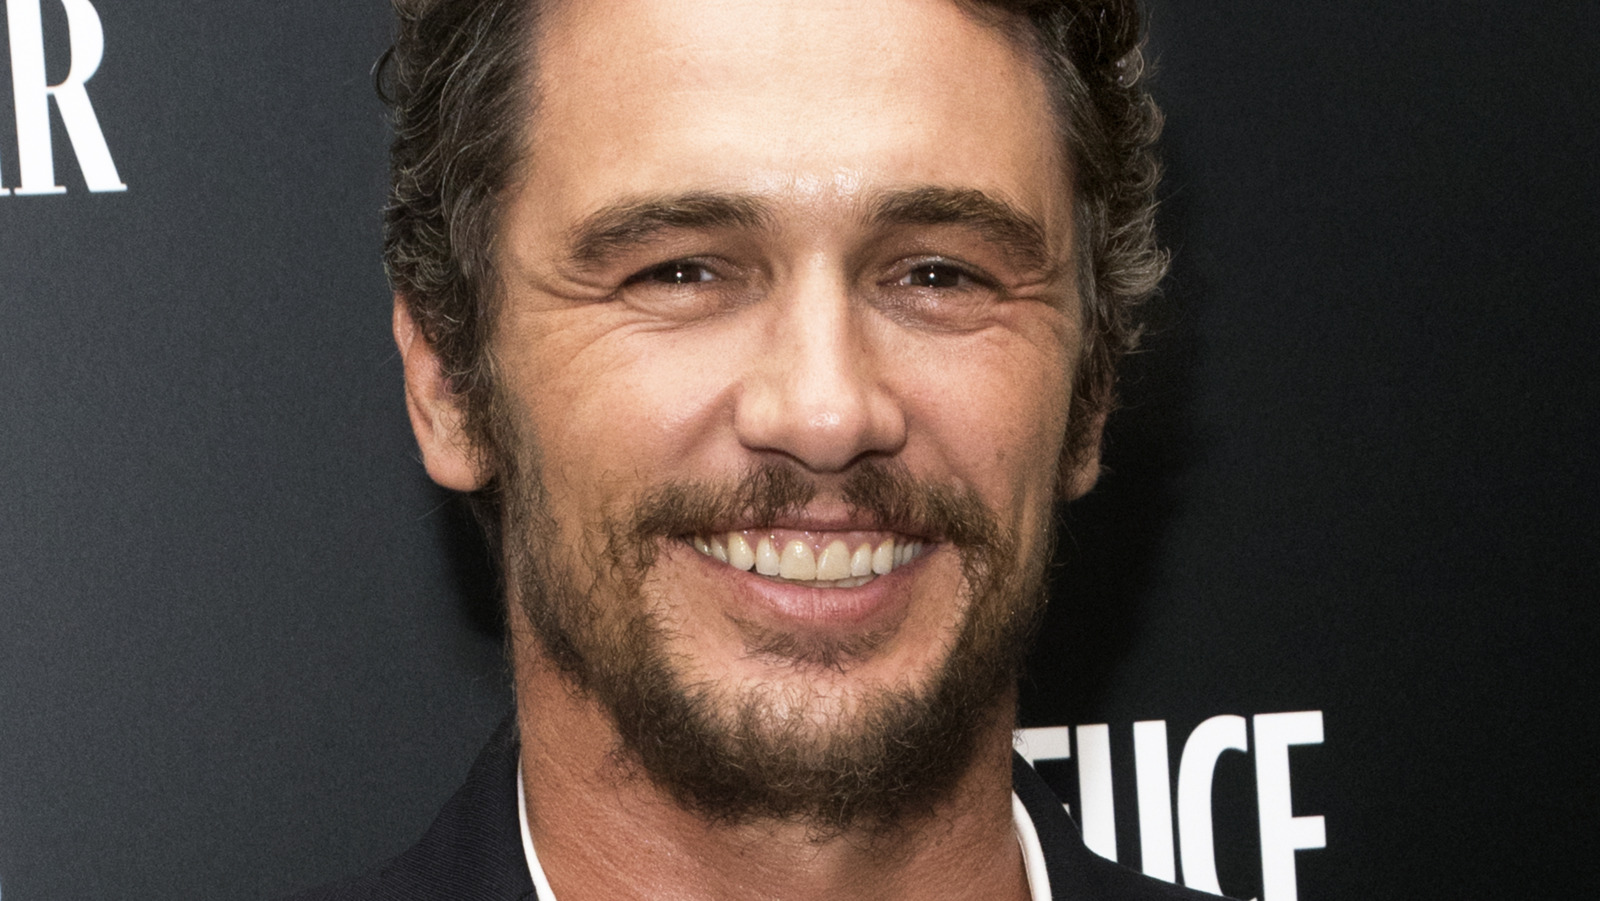 Here's How James Franco's Method Acting Hurt His Co-Star Tyrese Gibson